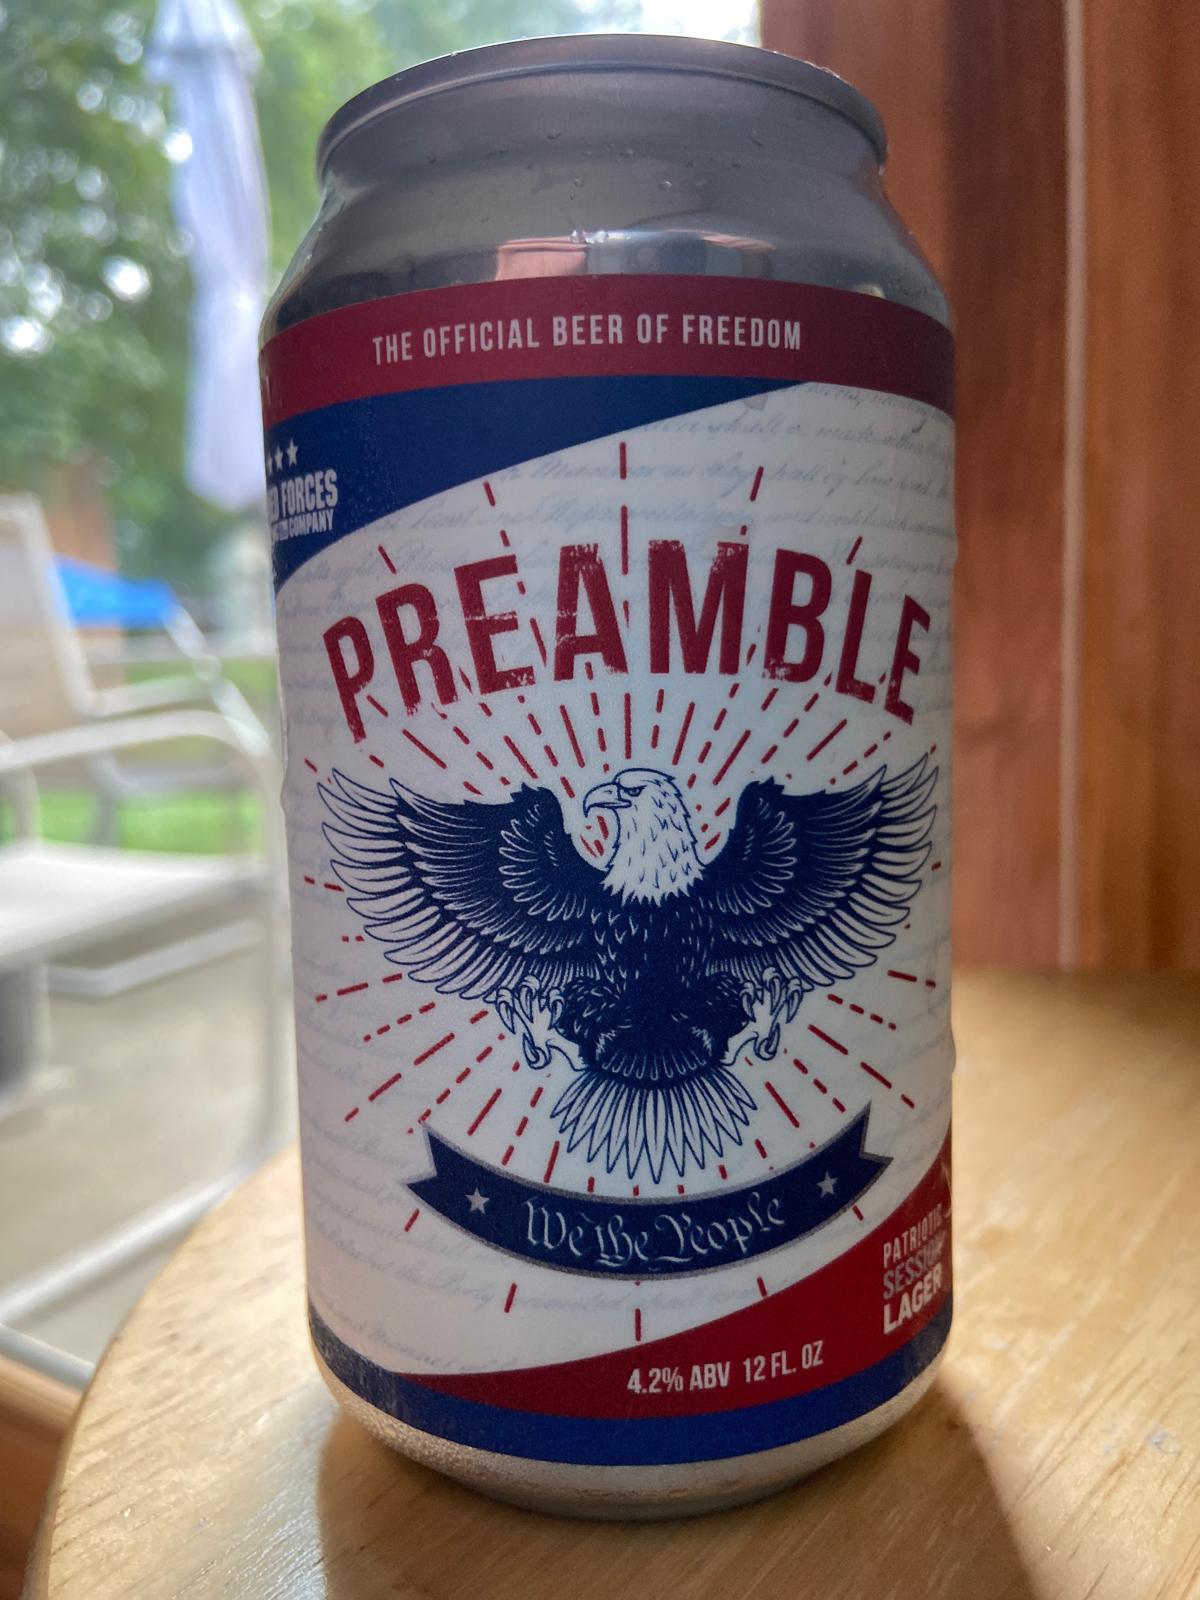 Preamble (Collaboration with Armed Forces Brewing Company)